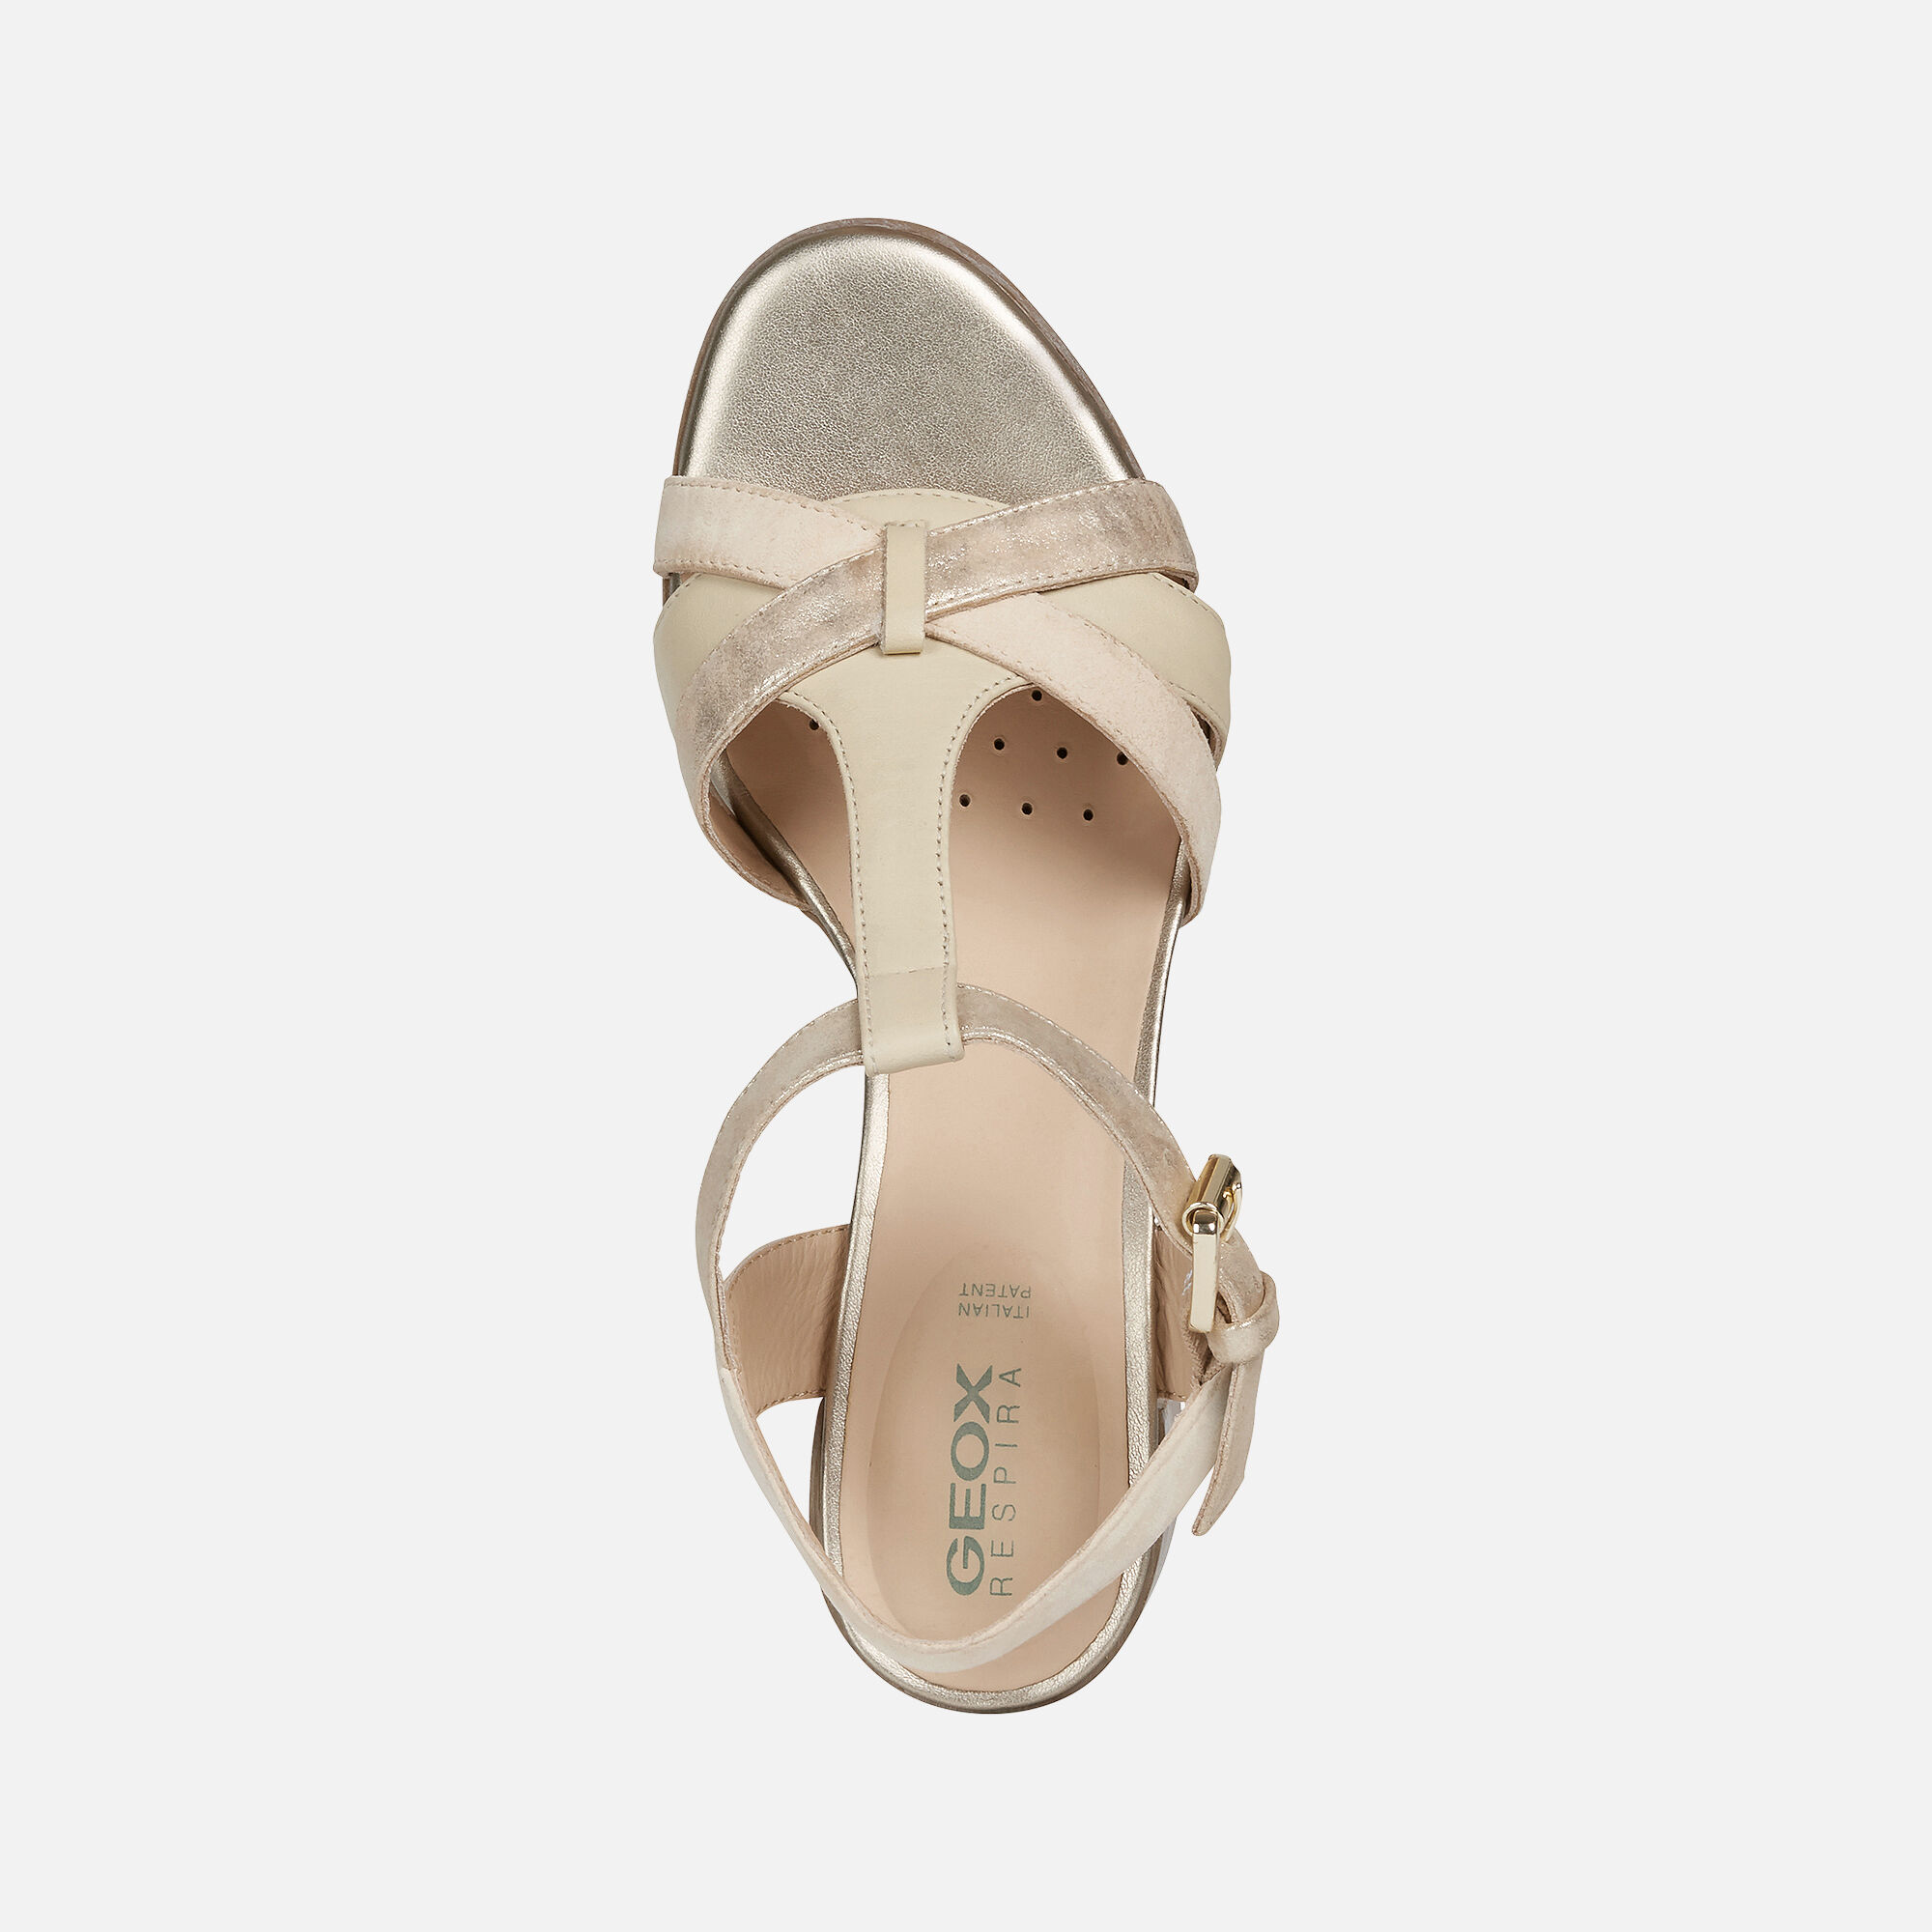 Geox MARYKARMEN Woman: Sand Sandals | Geox ® Official Store